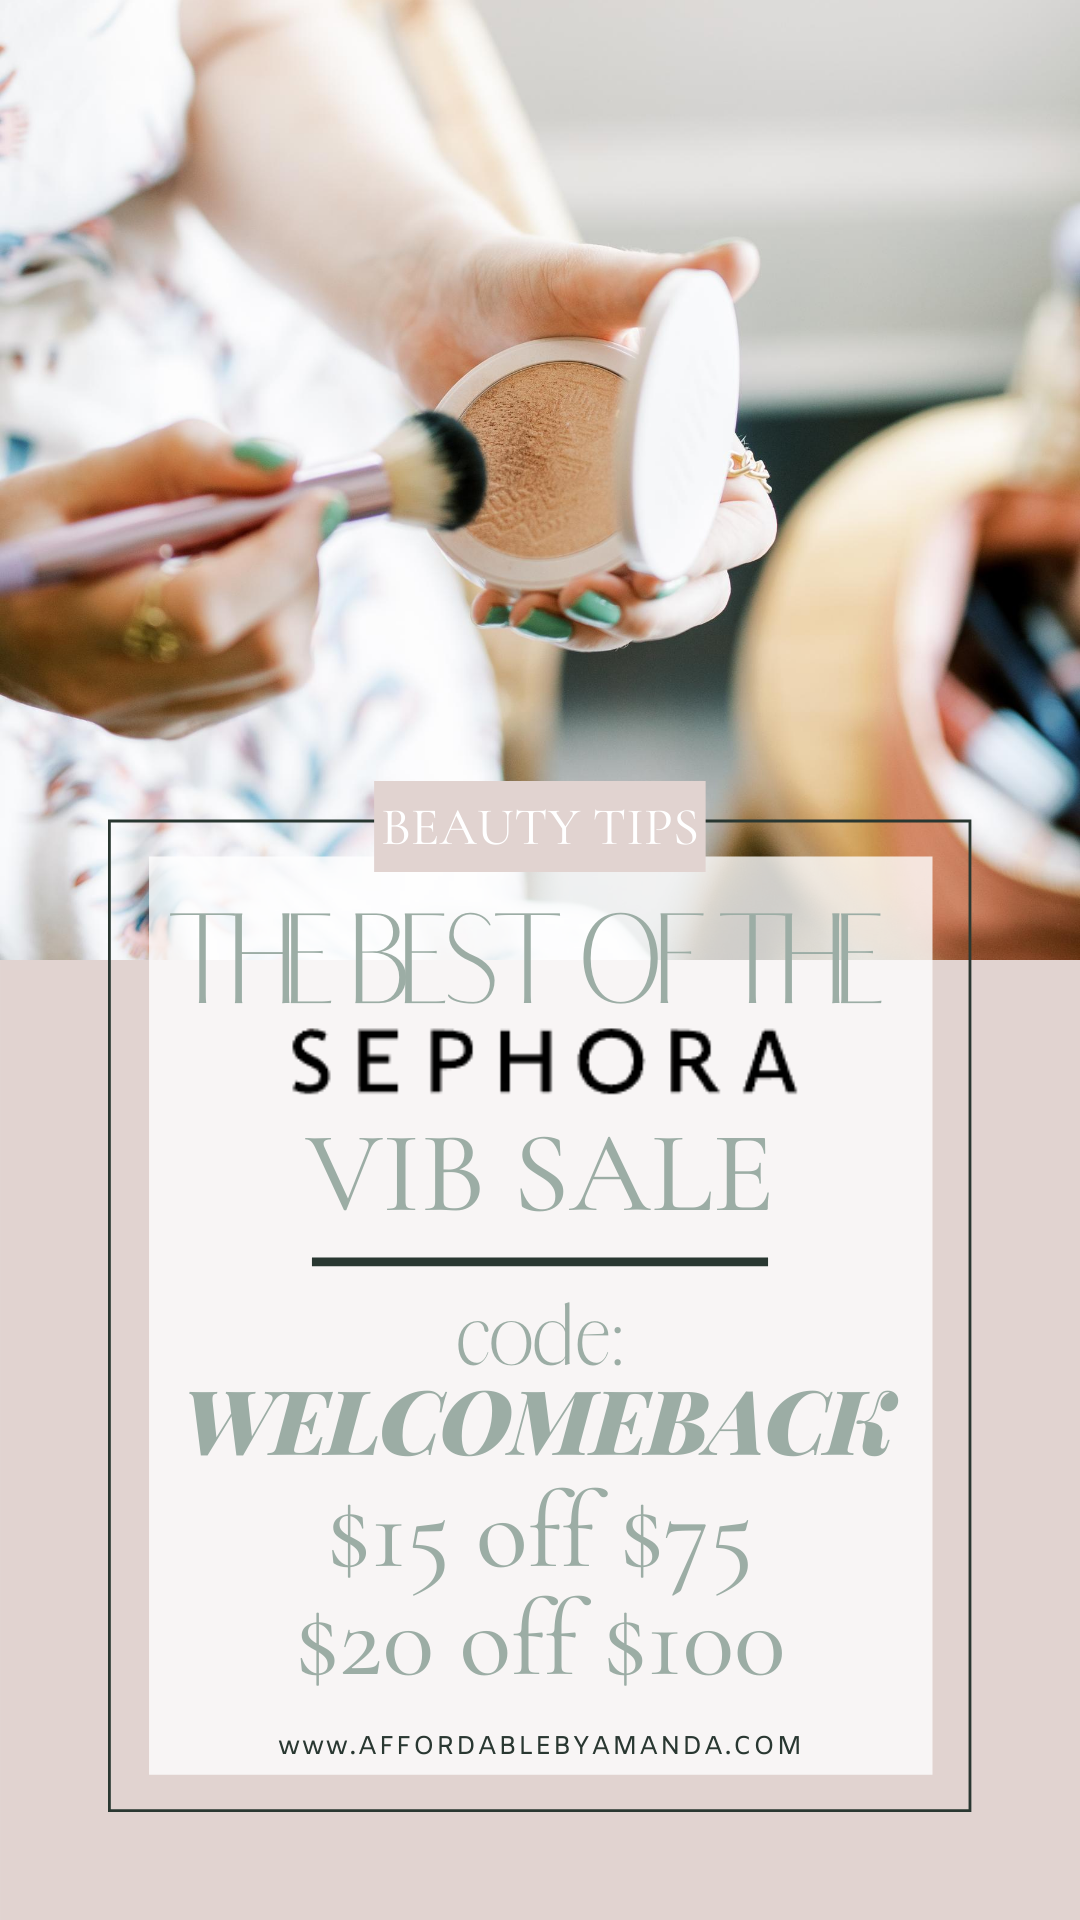 The Best of the Sephora VIB Sale | August 2020 Sephora Sale Top Products | Promo Code Sephora Sale 2020 